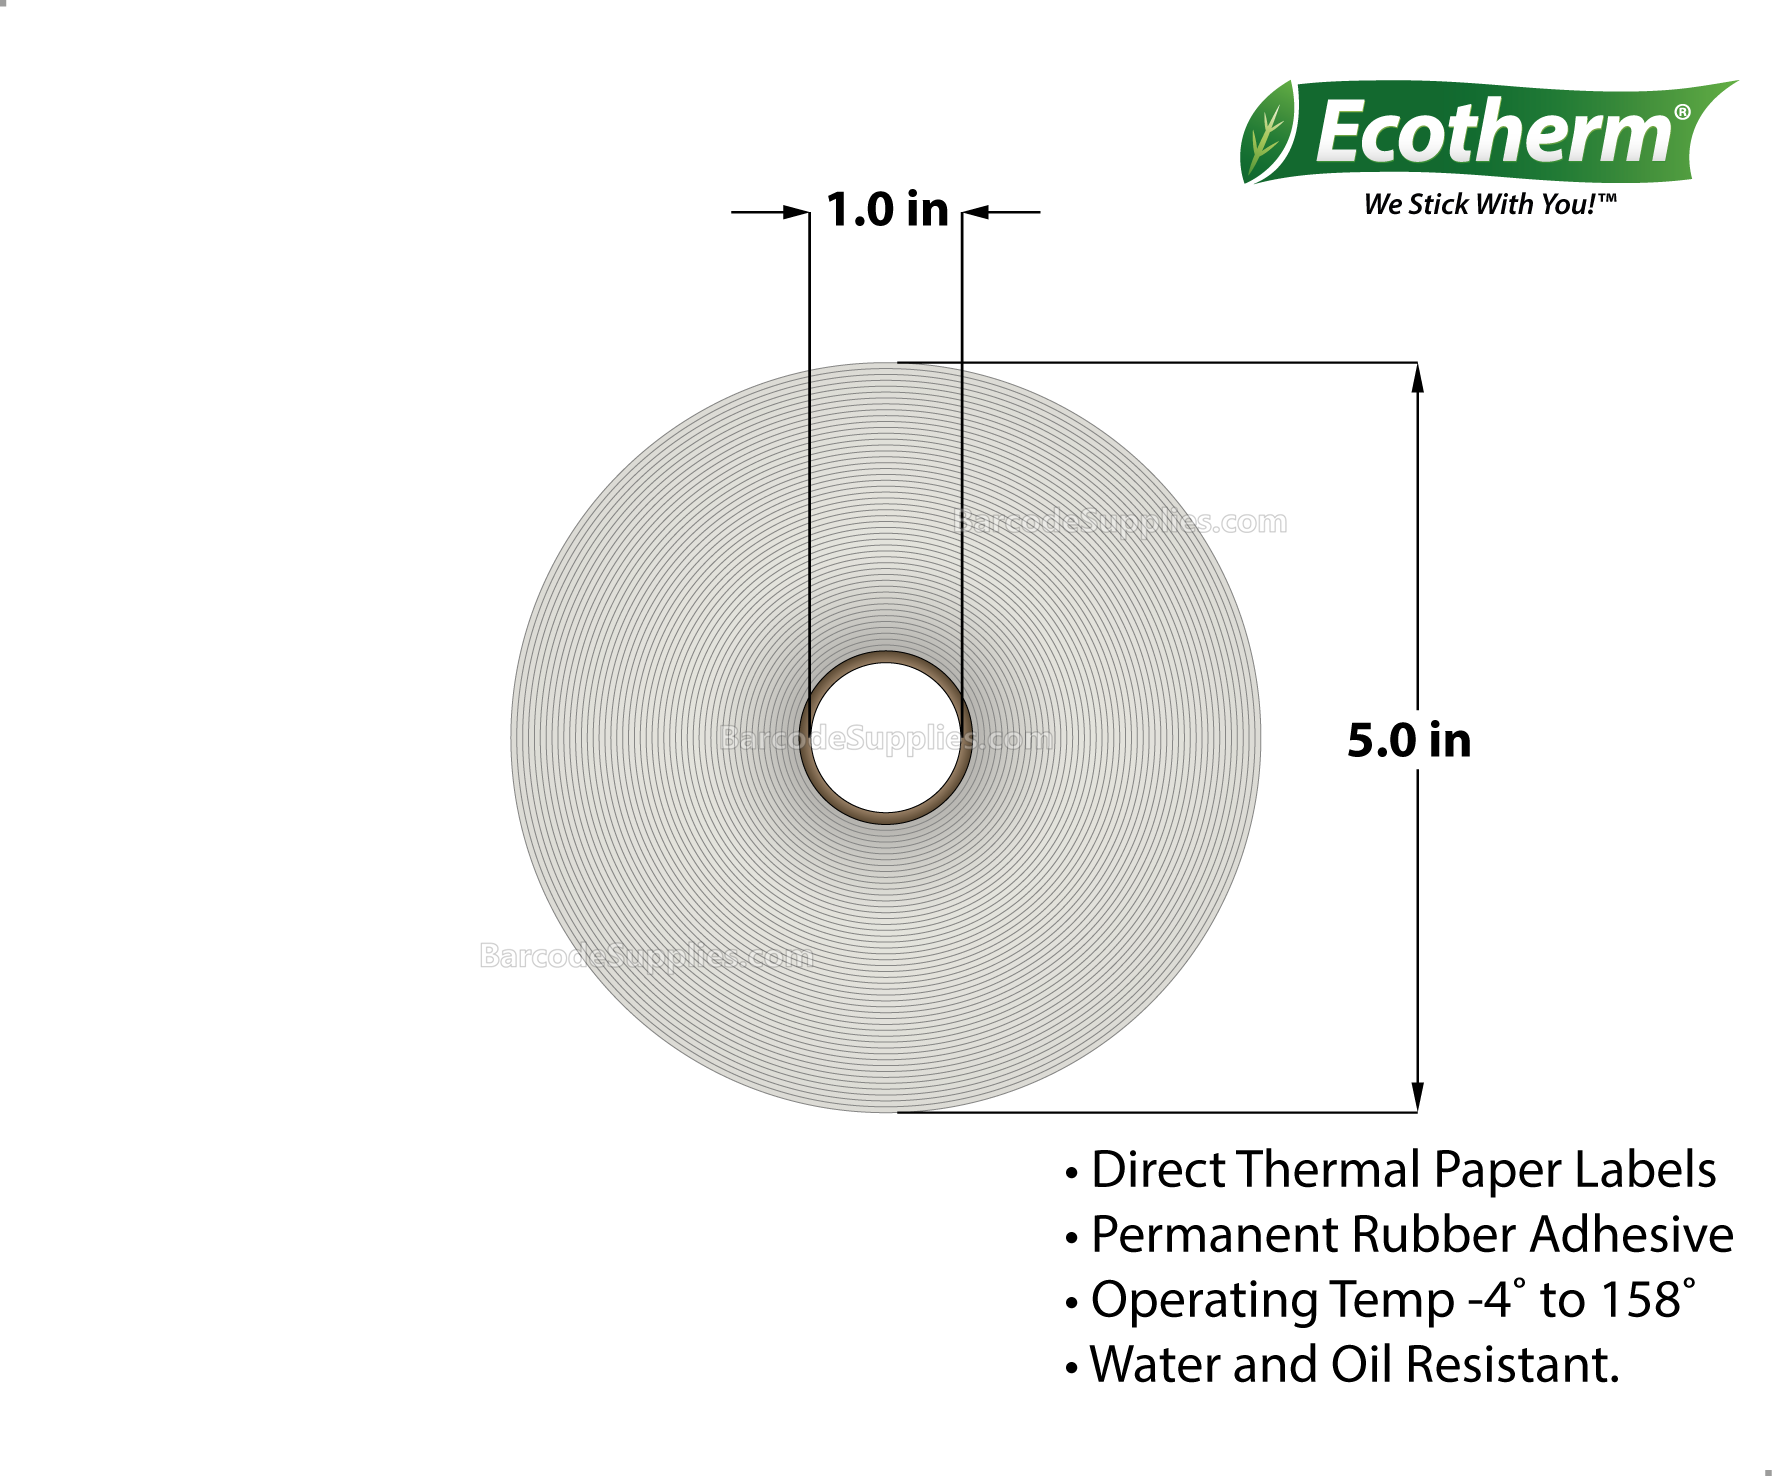 2.25 x 0.75 Direct Thermal White Labels With Rubber Adhesive - Perforated - 3315 Labels Per Roll - Carton Of 6 Rolls - 19890 Labels Total - MPN: ECOTHERM15123-6